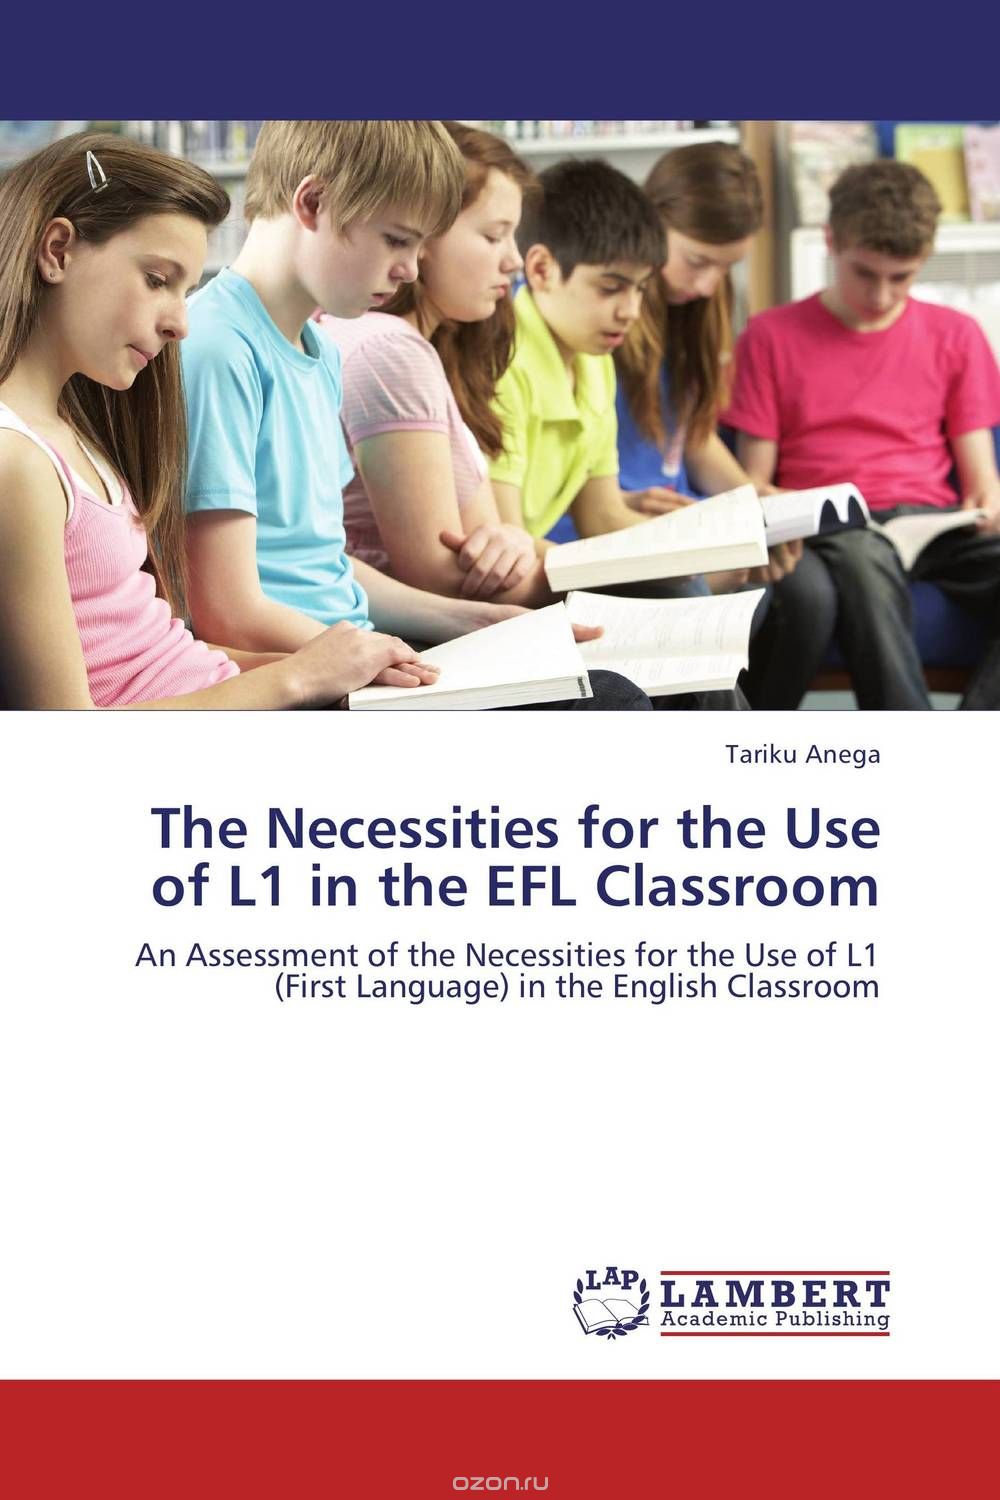 The Necessities for the Use of L1 in the EFL Classroom